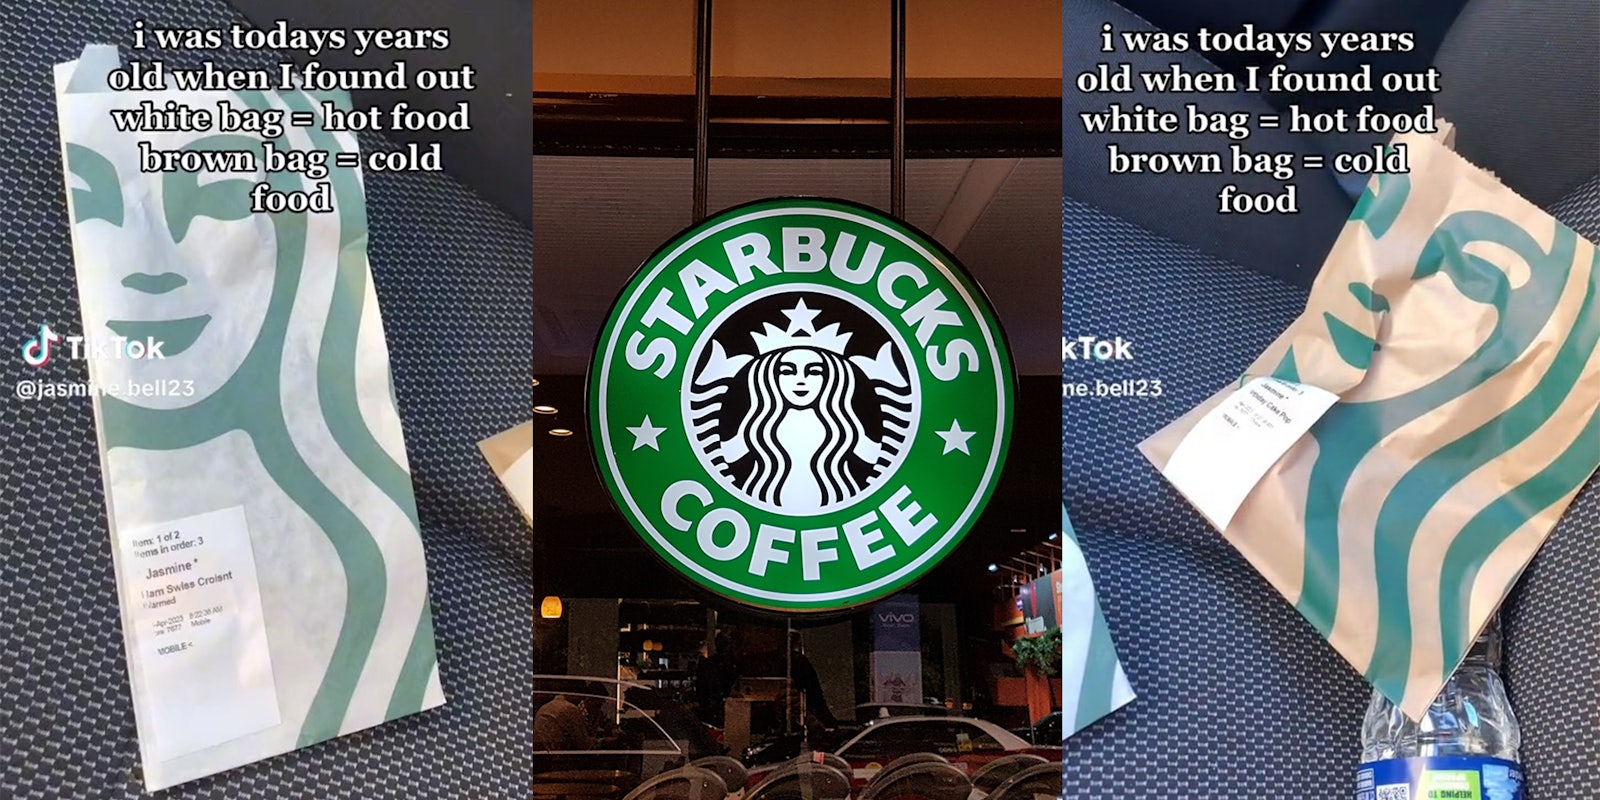 Person explains the difference between Starbuck's white and brown bag.